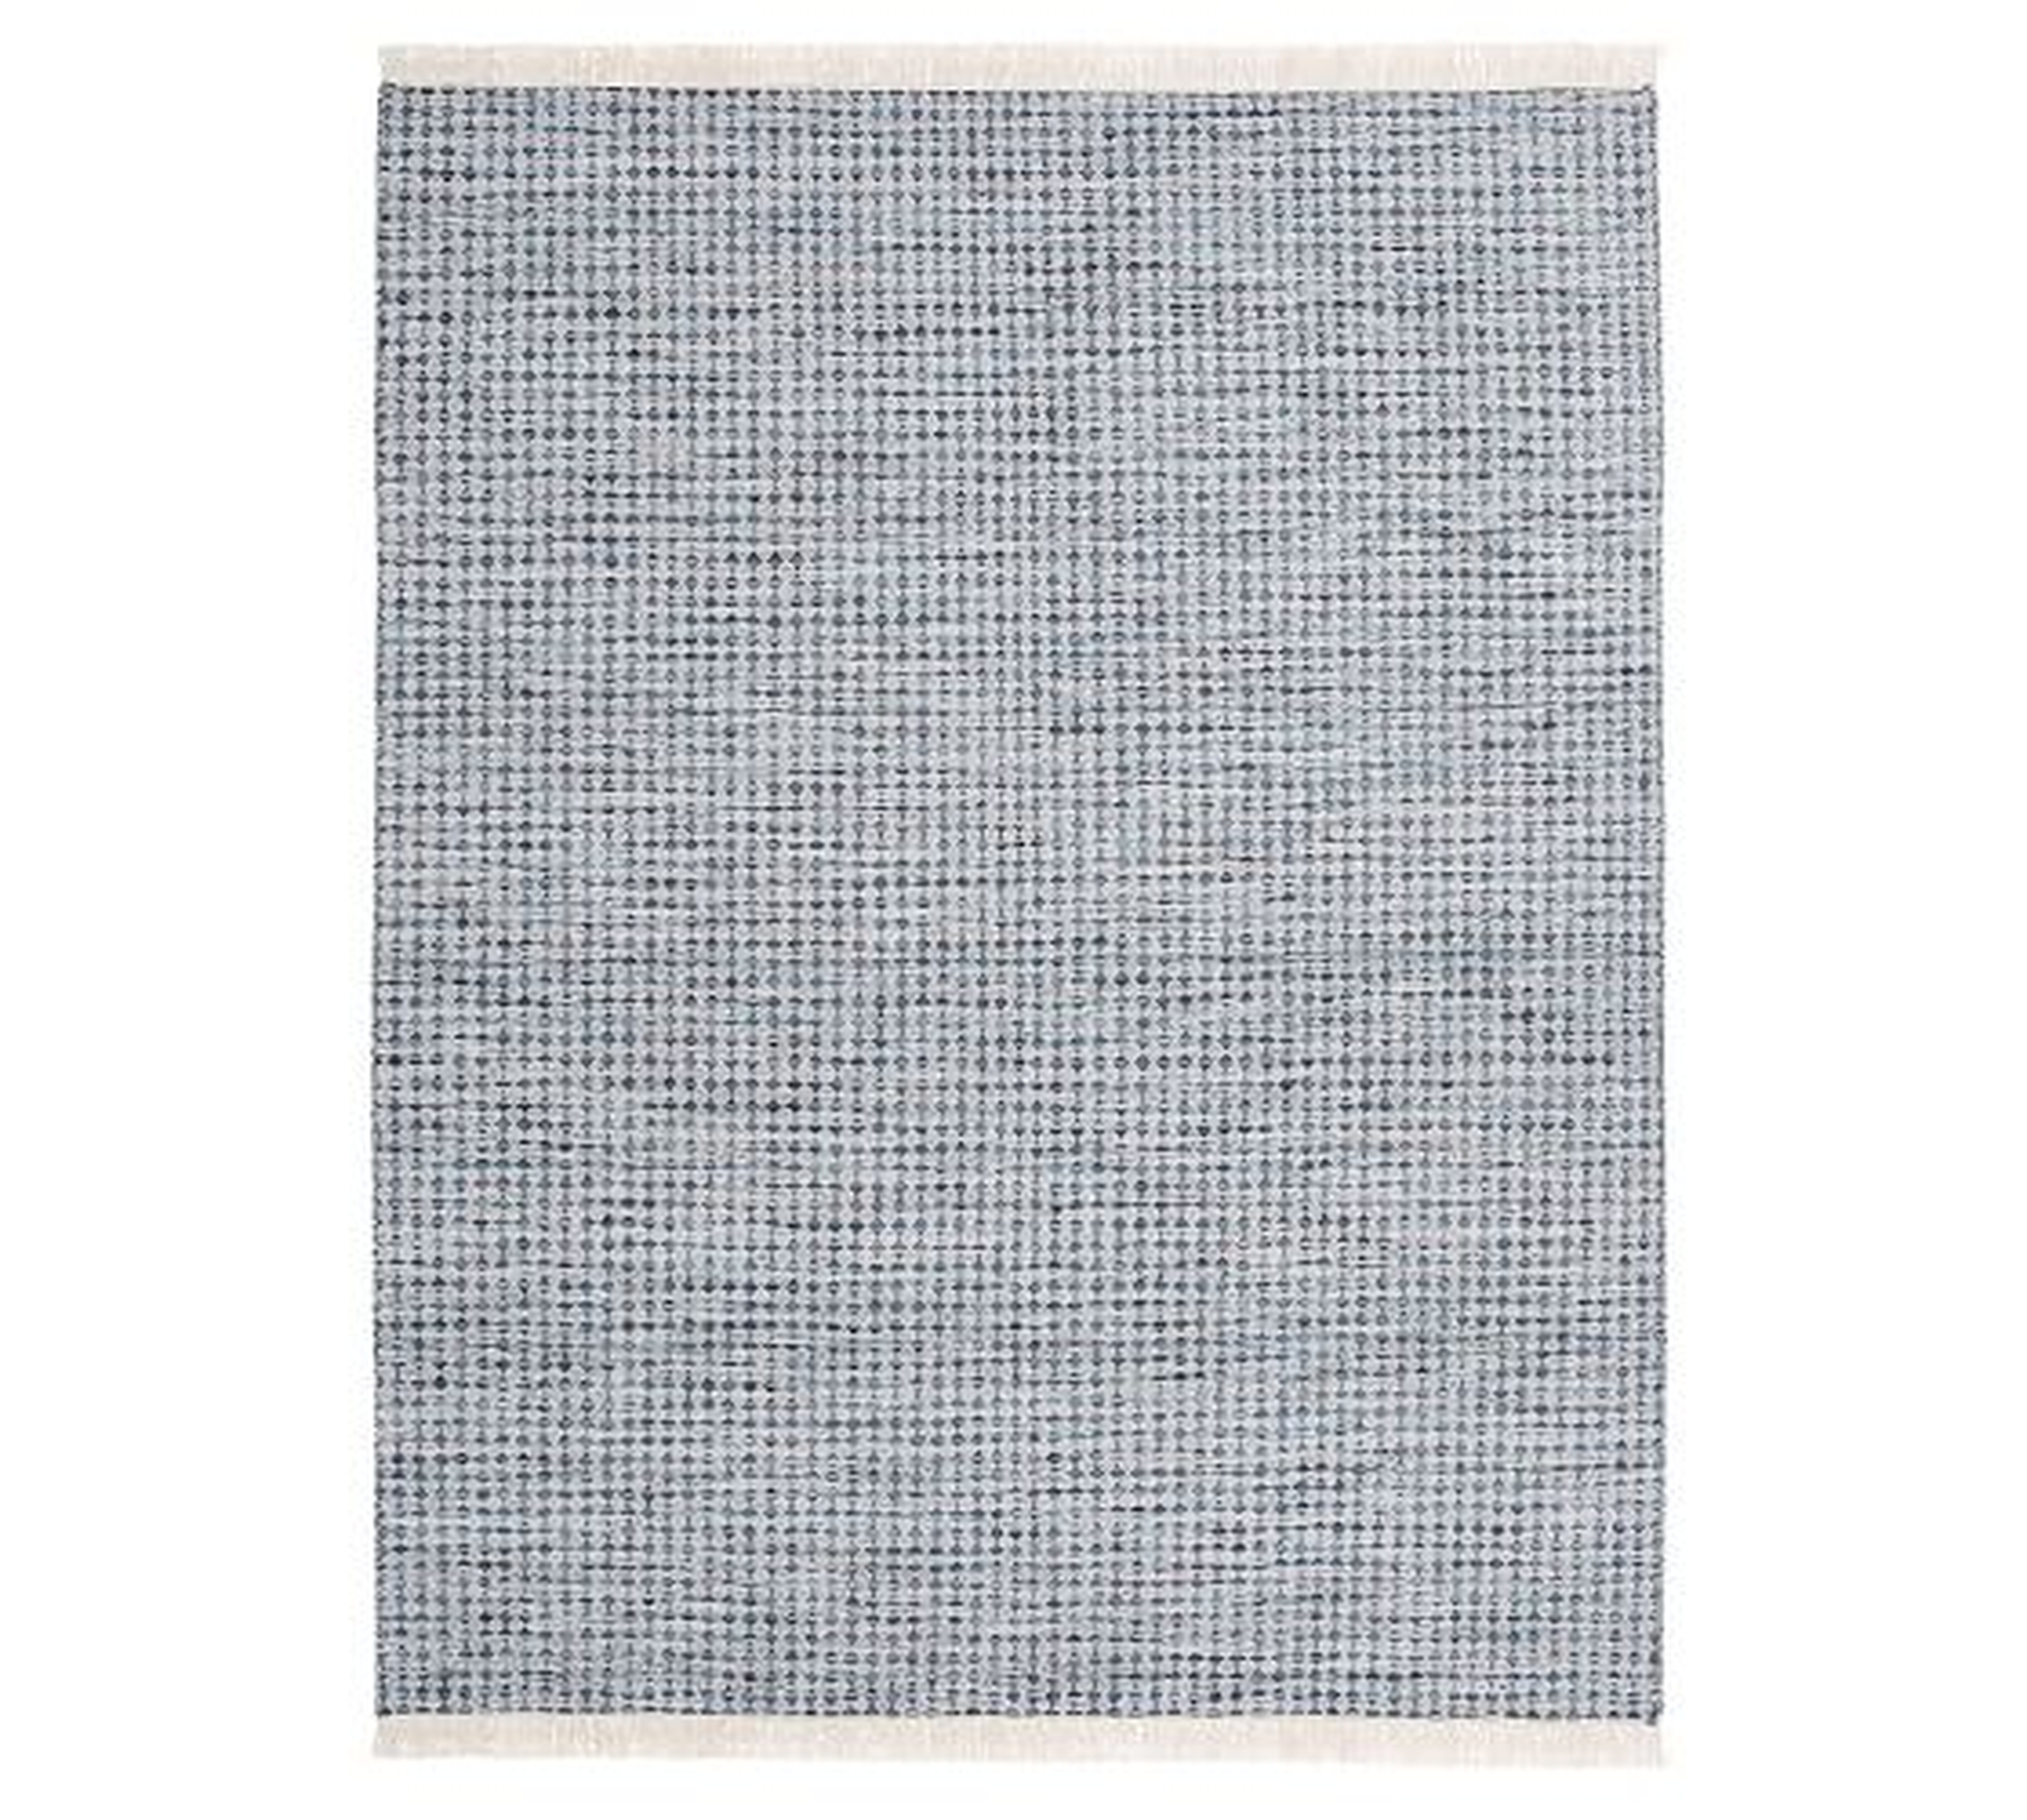 Oden Rug, 8x10', Blue - Pottery Barn